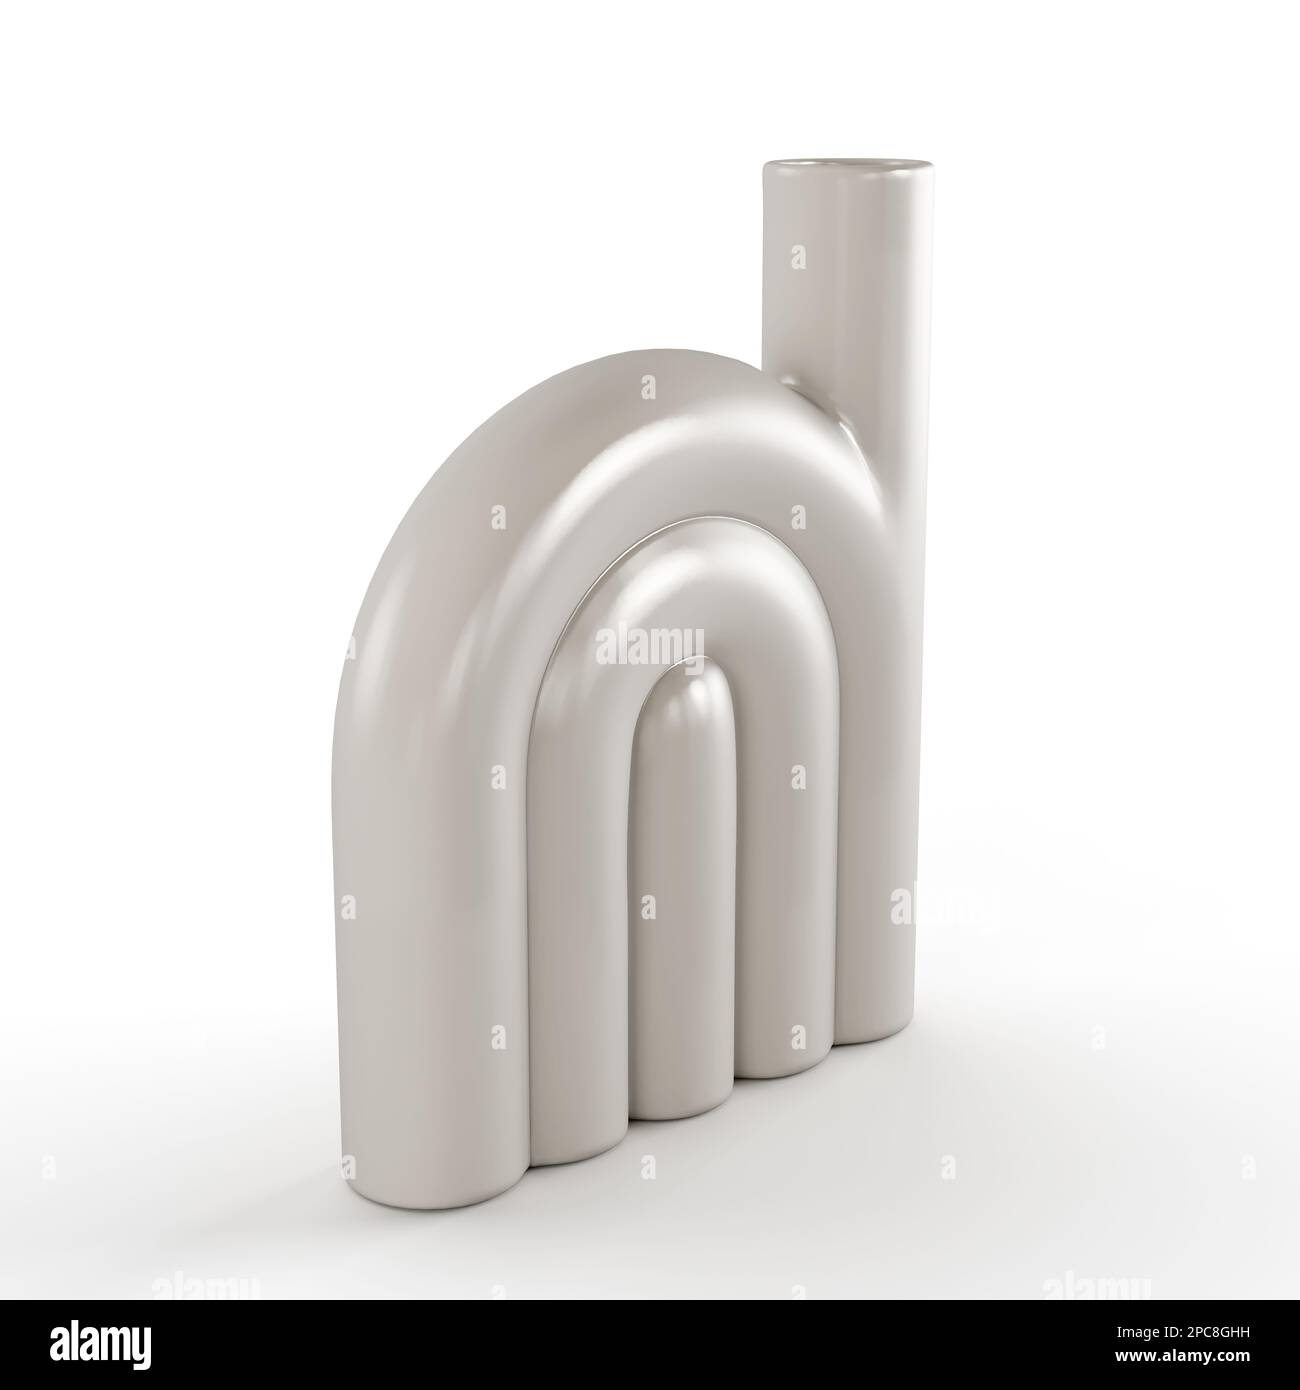 A white object with metallic components in an abstract design Stock Photo